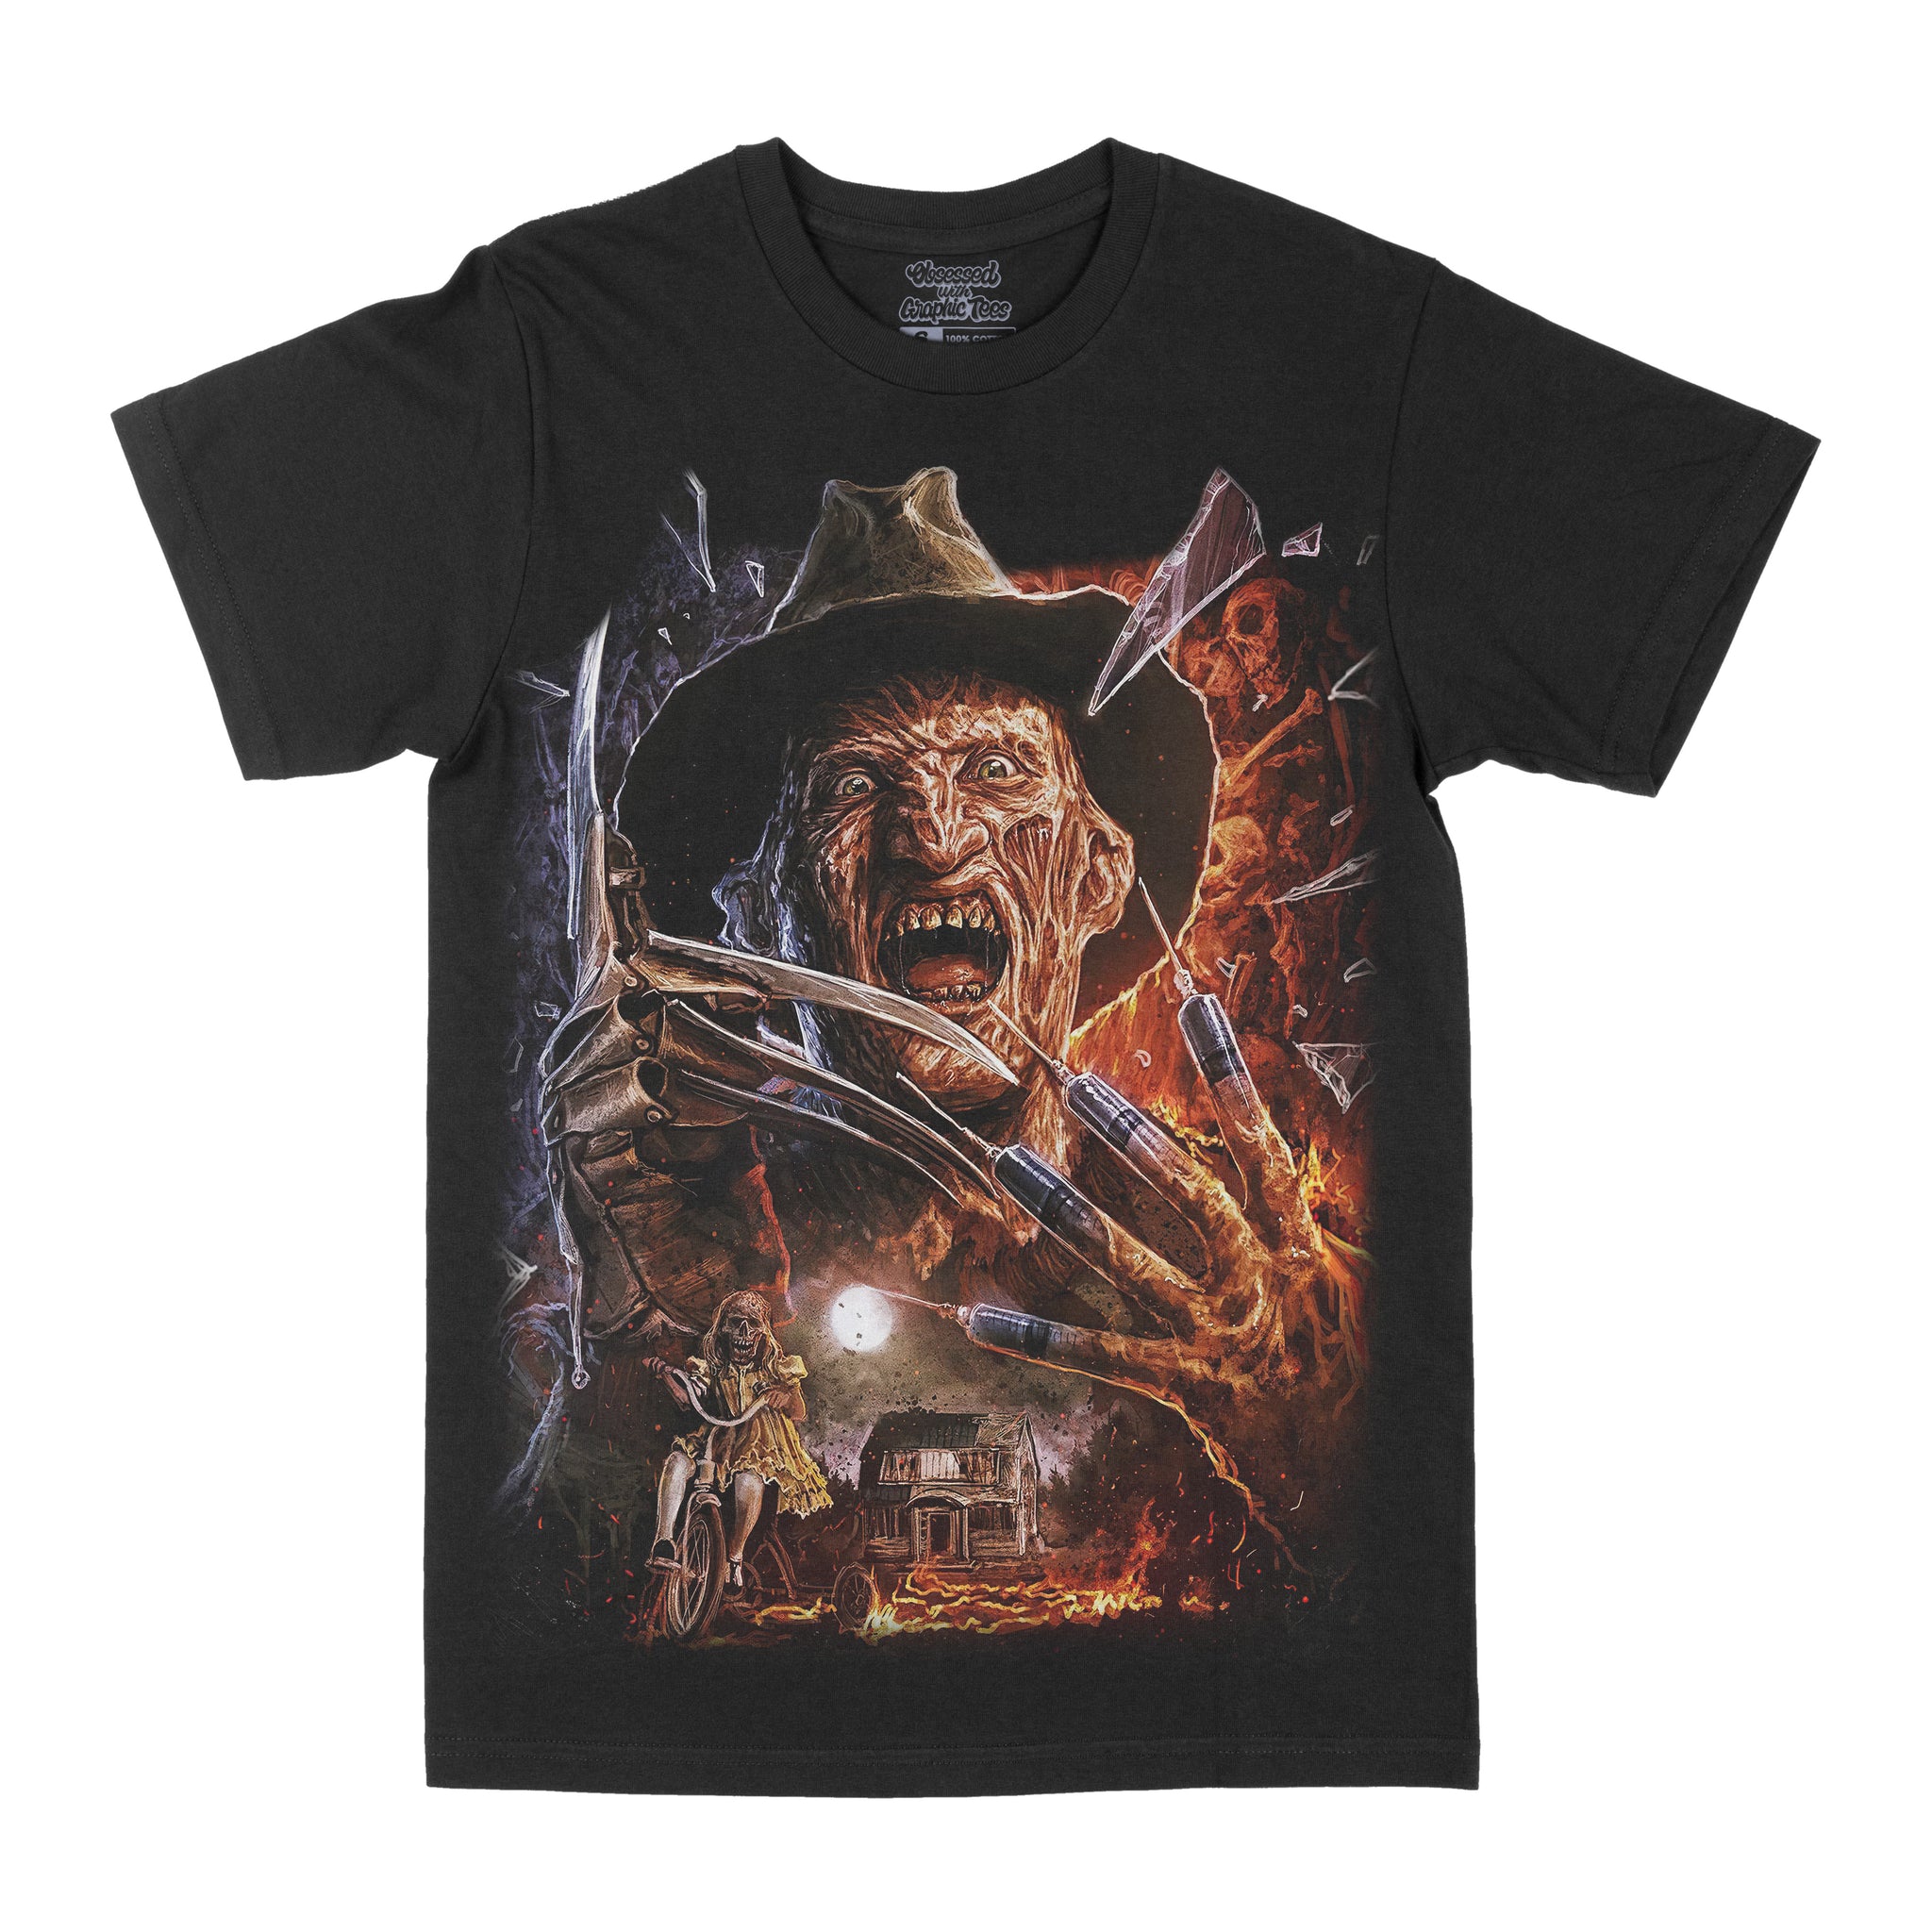 Freddy's Back Graphic Tee